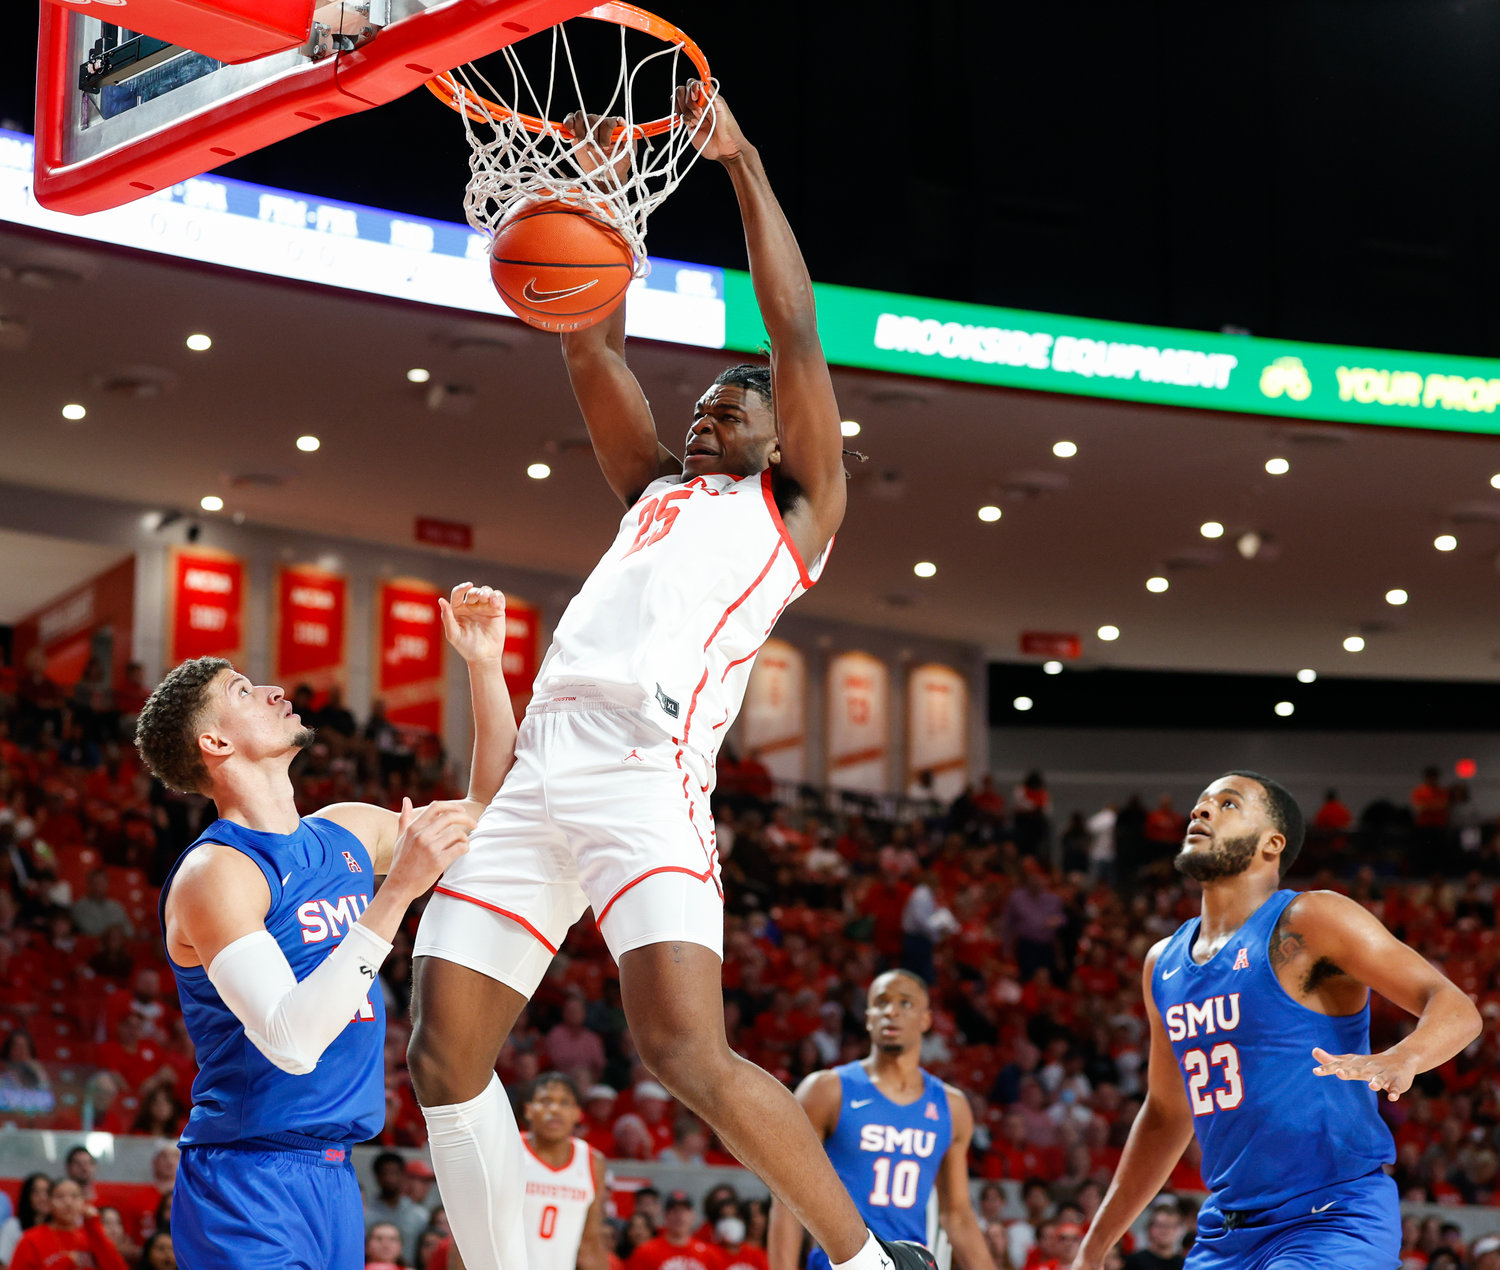 Houston forward Jarace Walker (25) dunks the ball during an NCAA men’s basketball game between the Houston Cougars and the Southern Methodist Mustangs on Jan. 5, 2023 in Houston. Houston won, 87-53,